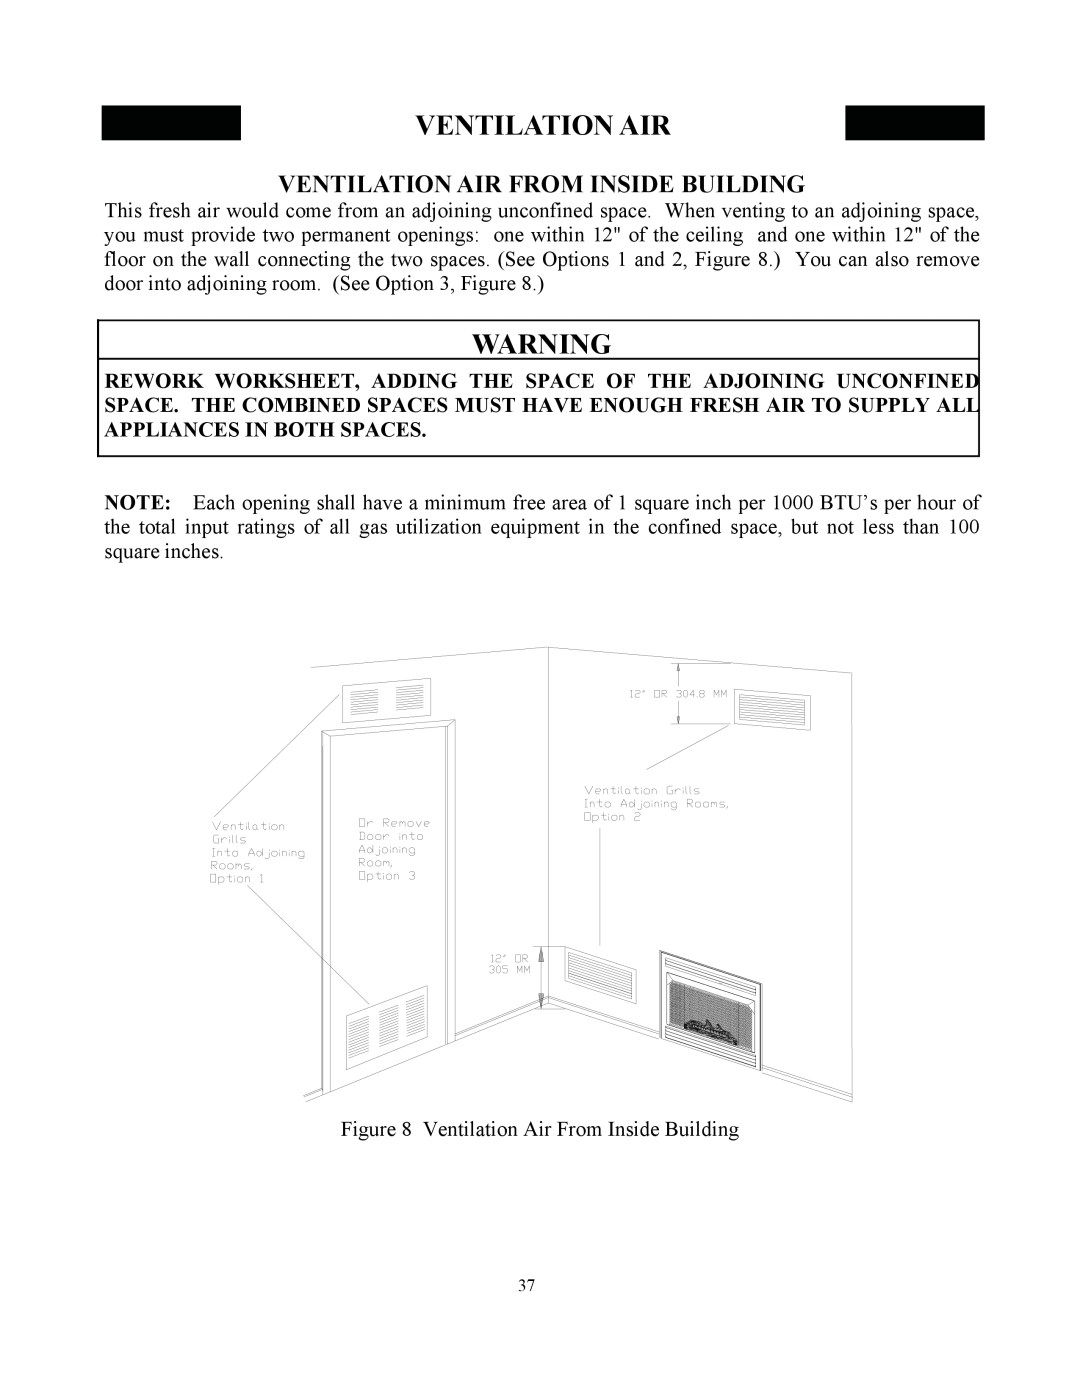 New Buck Corporation 34 manual Ventilation Air From Inside Building 